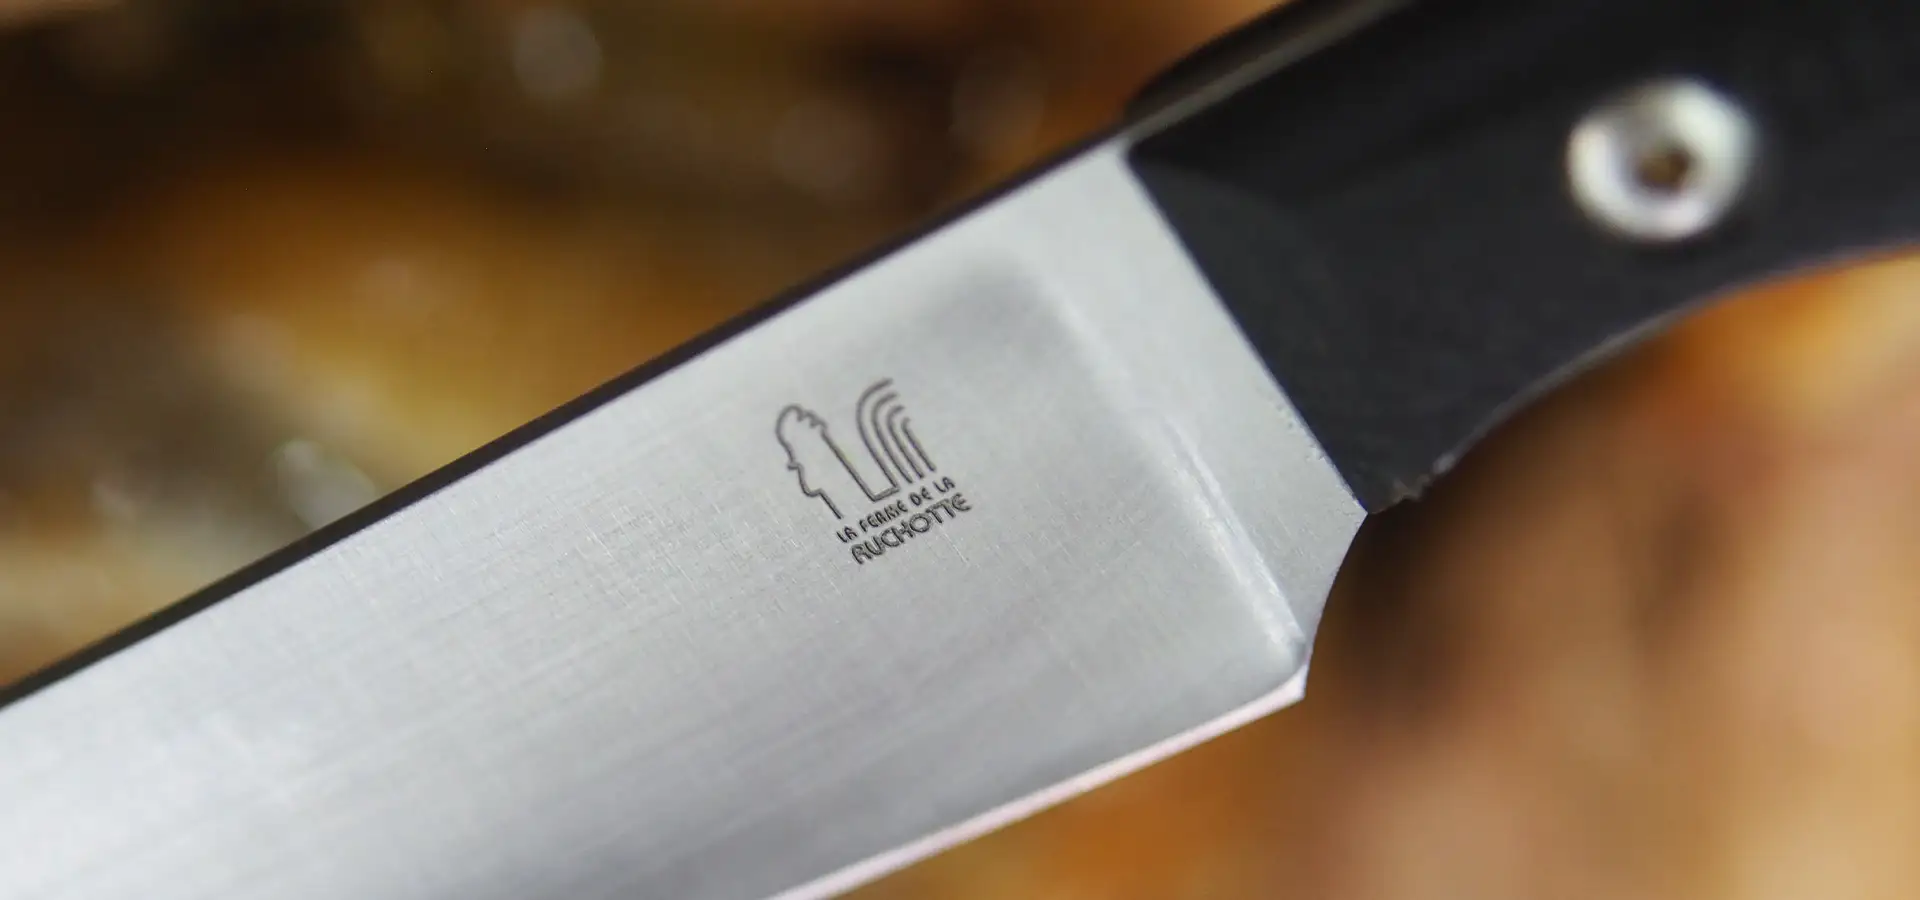 La Ruchotte knife, a knife studied and designed for cutting